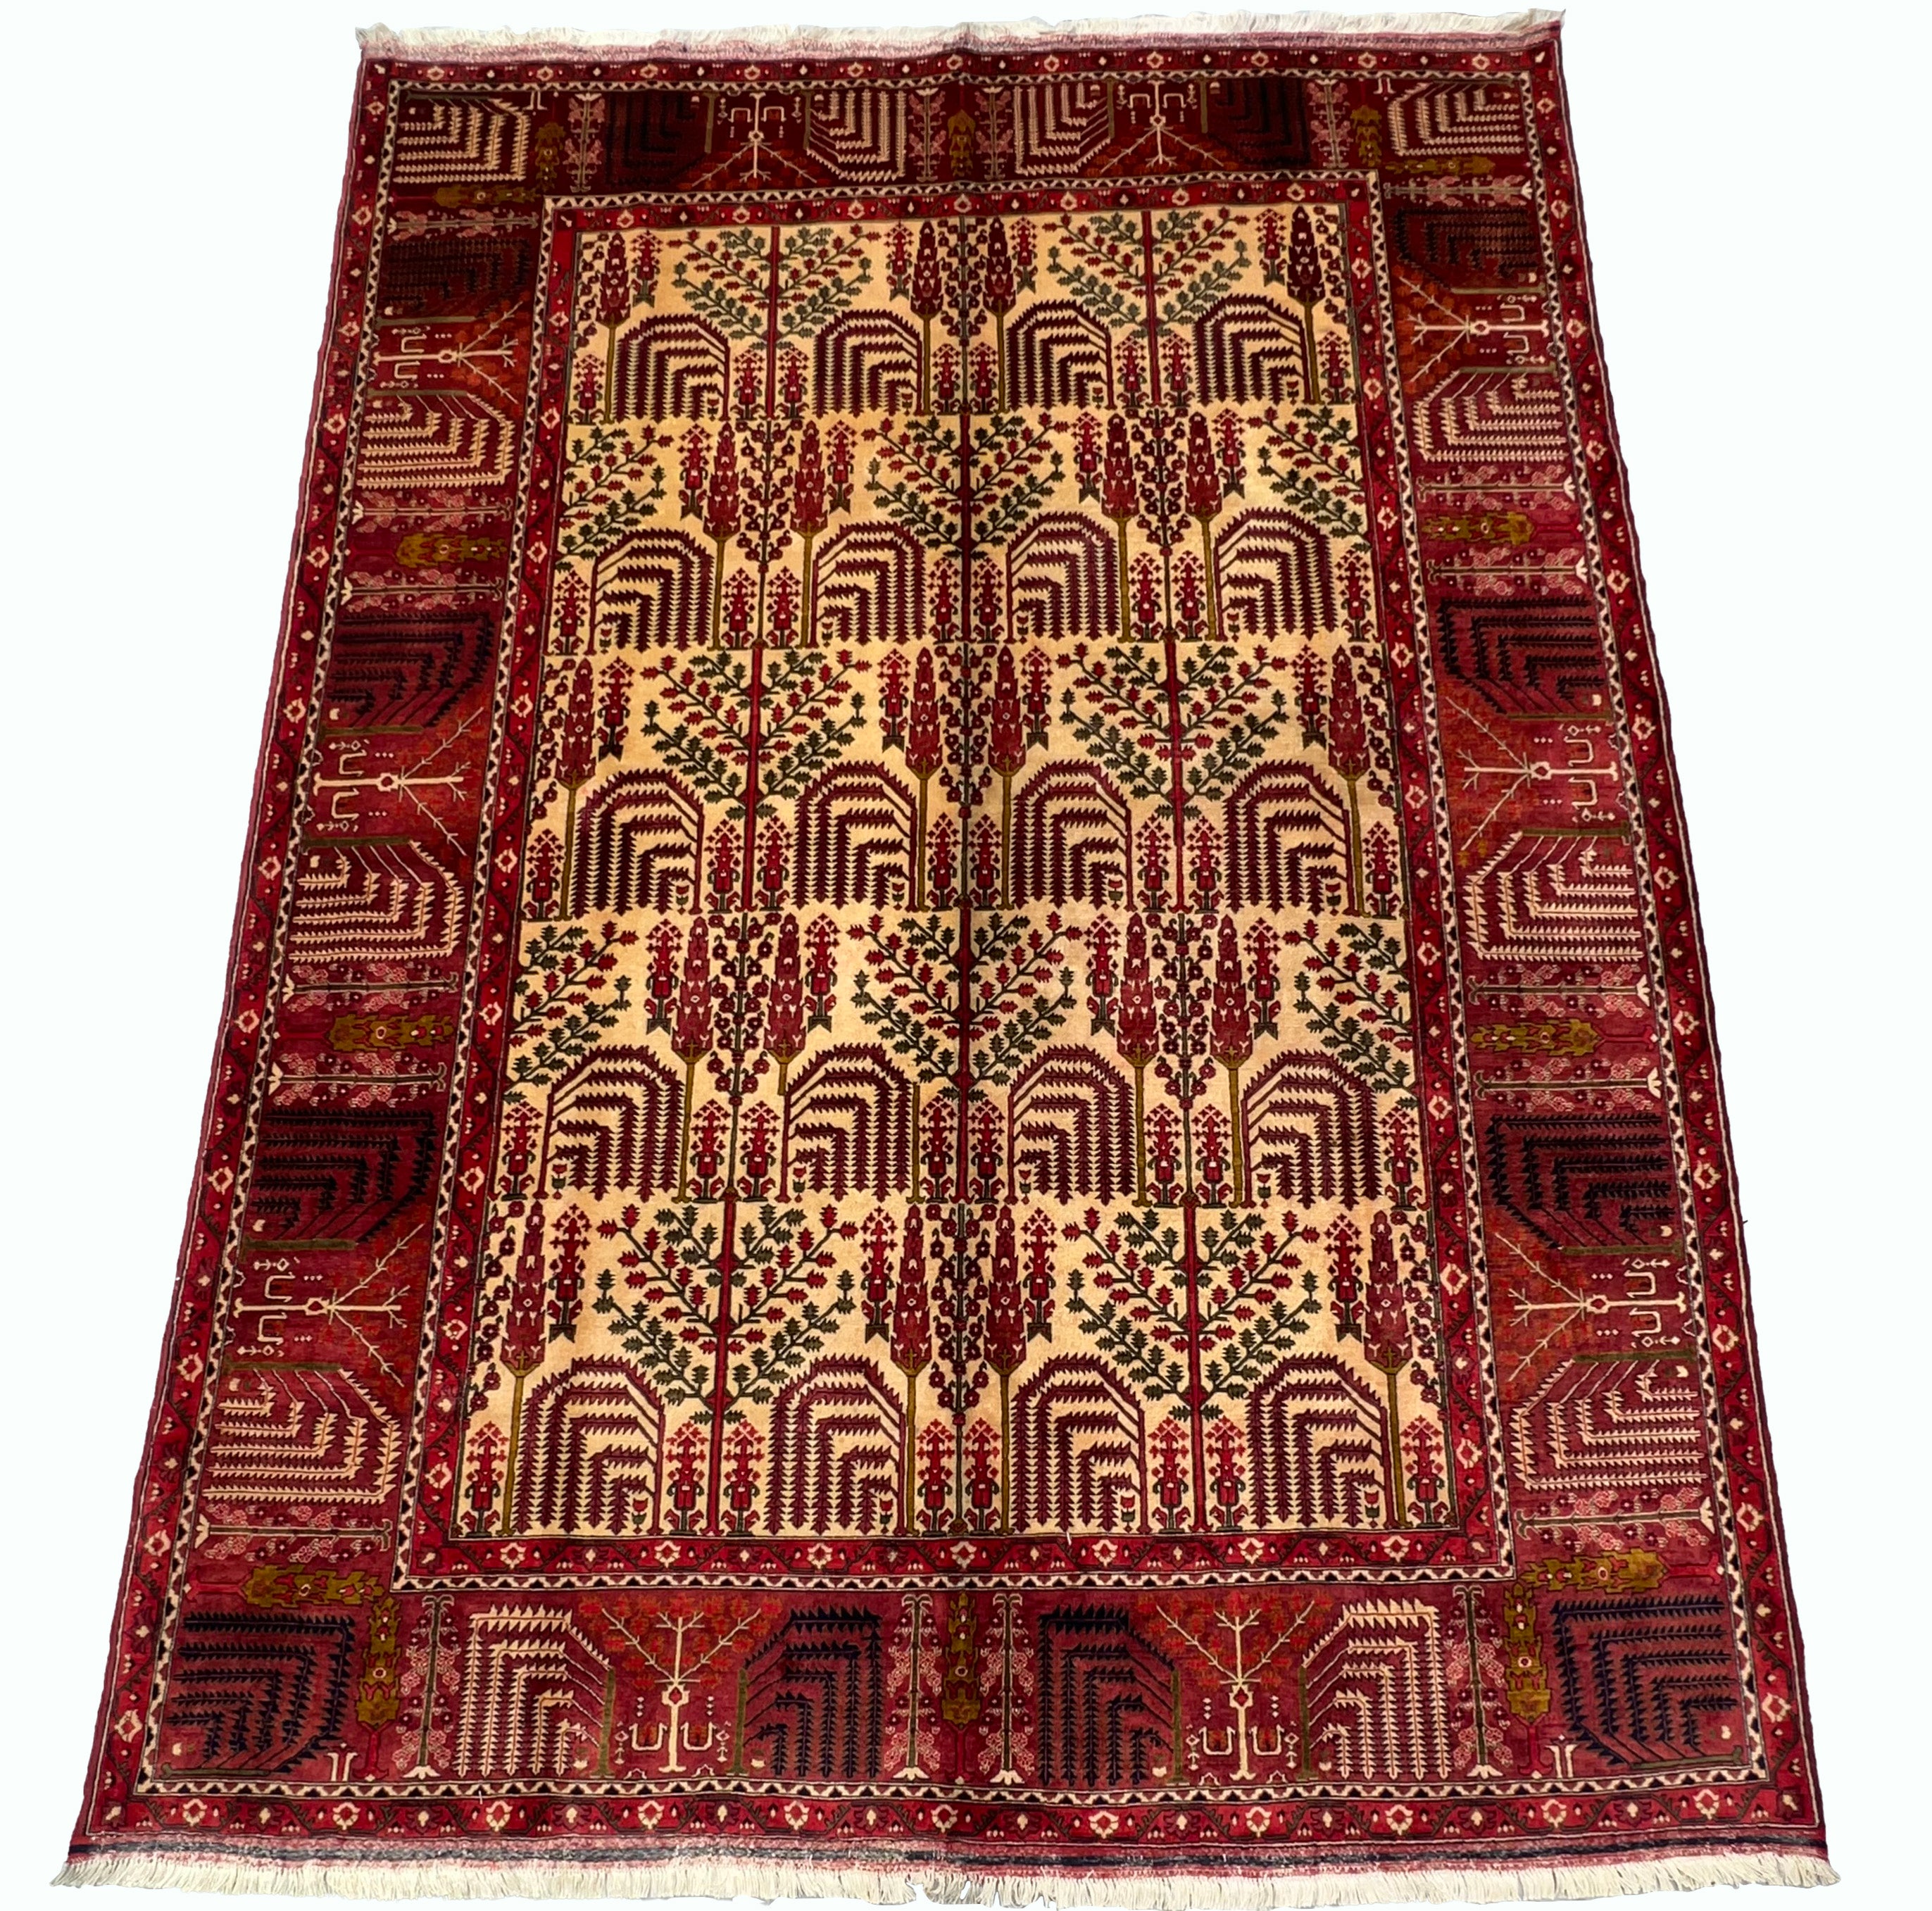 Home page – Kabul Rugs